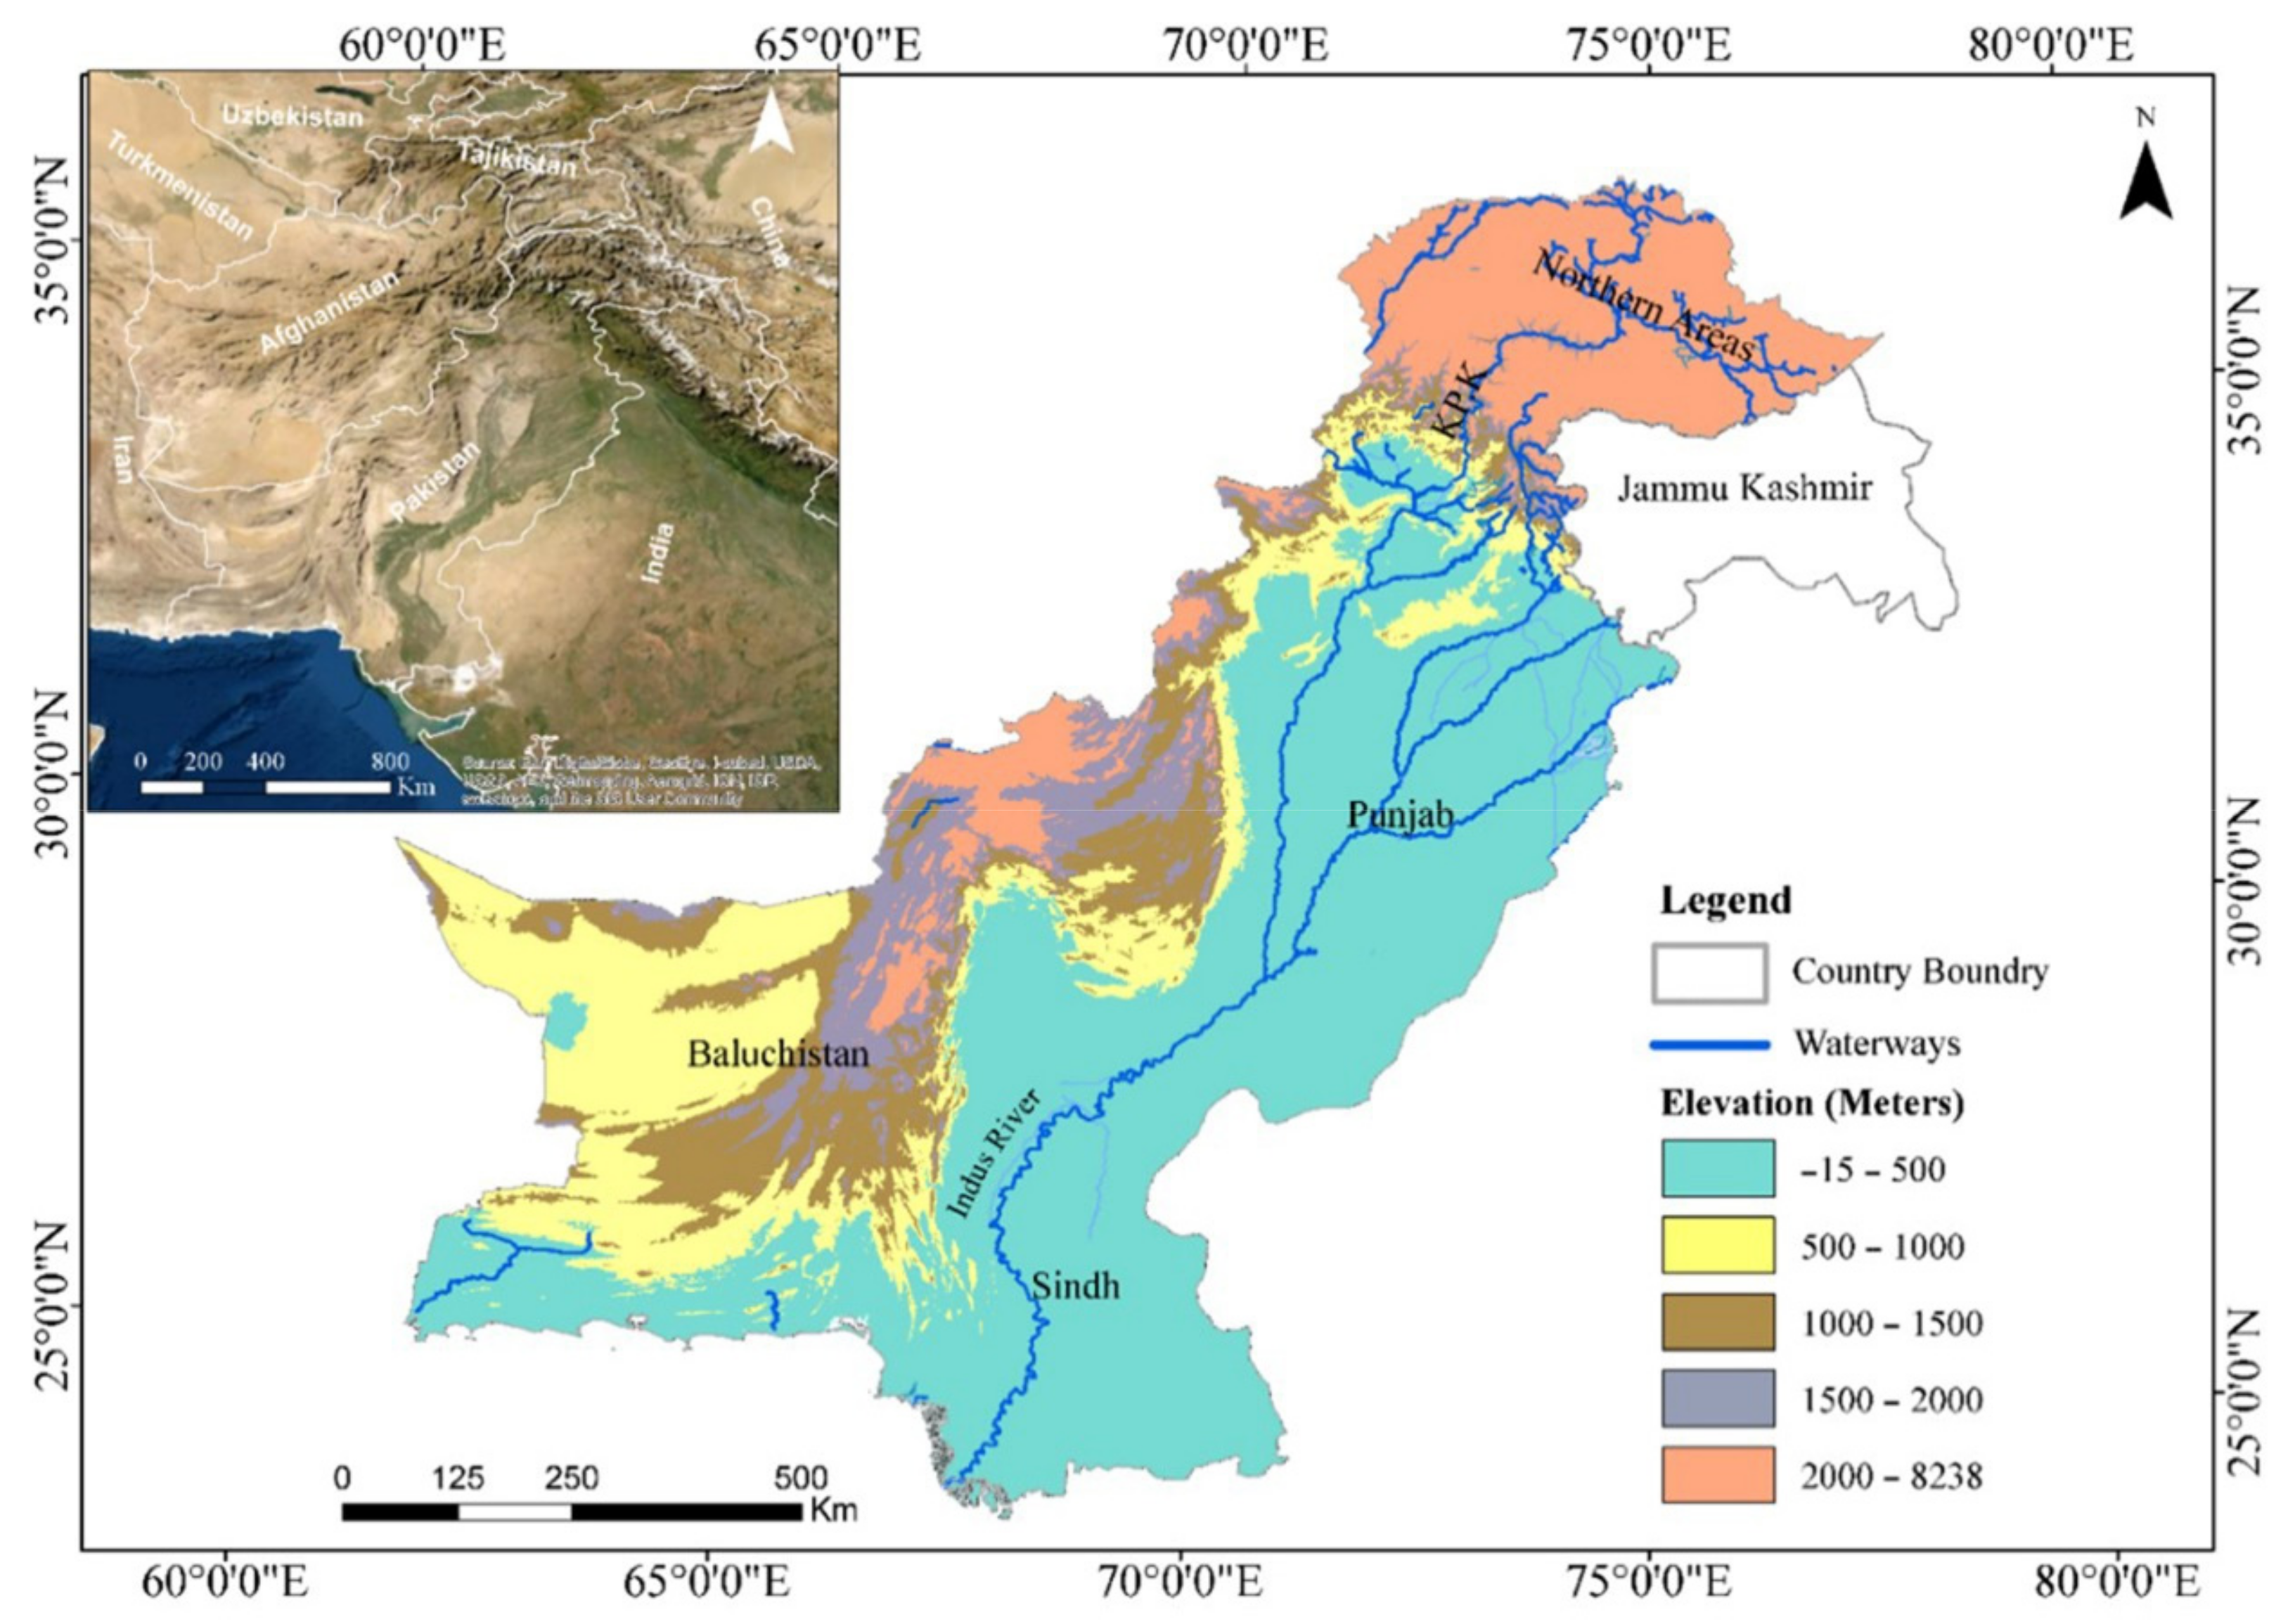 Opinion: An equation to restore river basins in South Asia